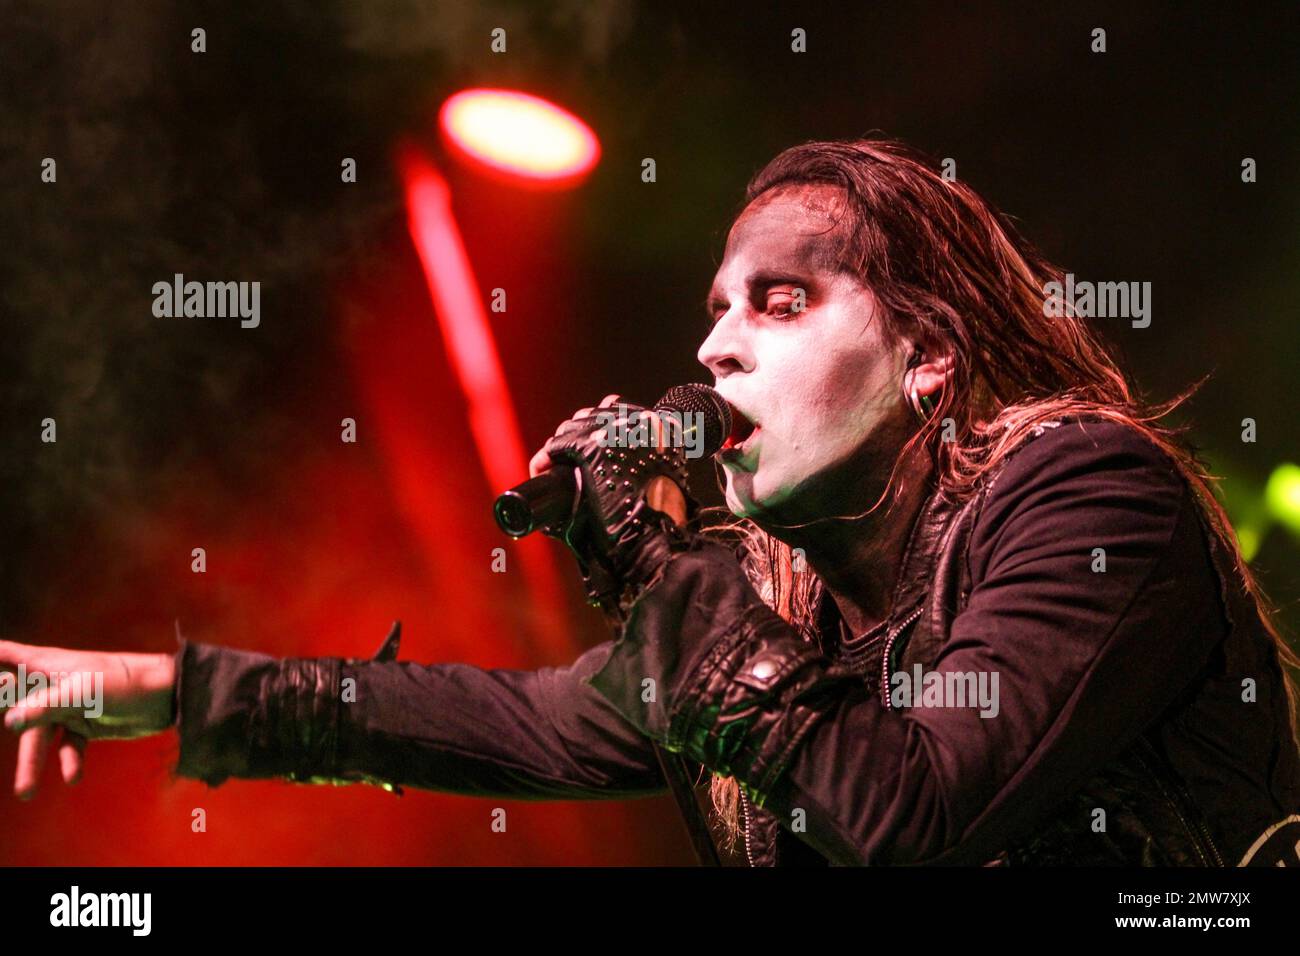 Lord of the Lost,German gothic metal and dark rock band with singer and frontman Chris Harms aka The Lord, at show 'Eisheilige Nacht 2016' (hosted by Subway to Sally), at Messehalle 1 / Messe Gießen, Germany. 16th Dec, 2016. Credit: Christian Lademann / LademannMedia Stock Photo